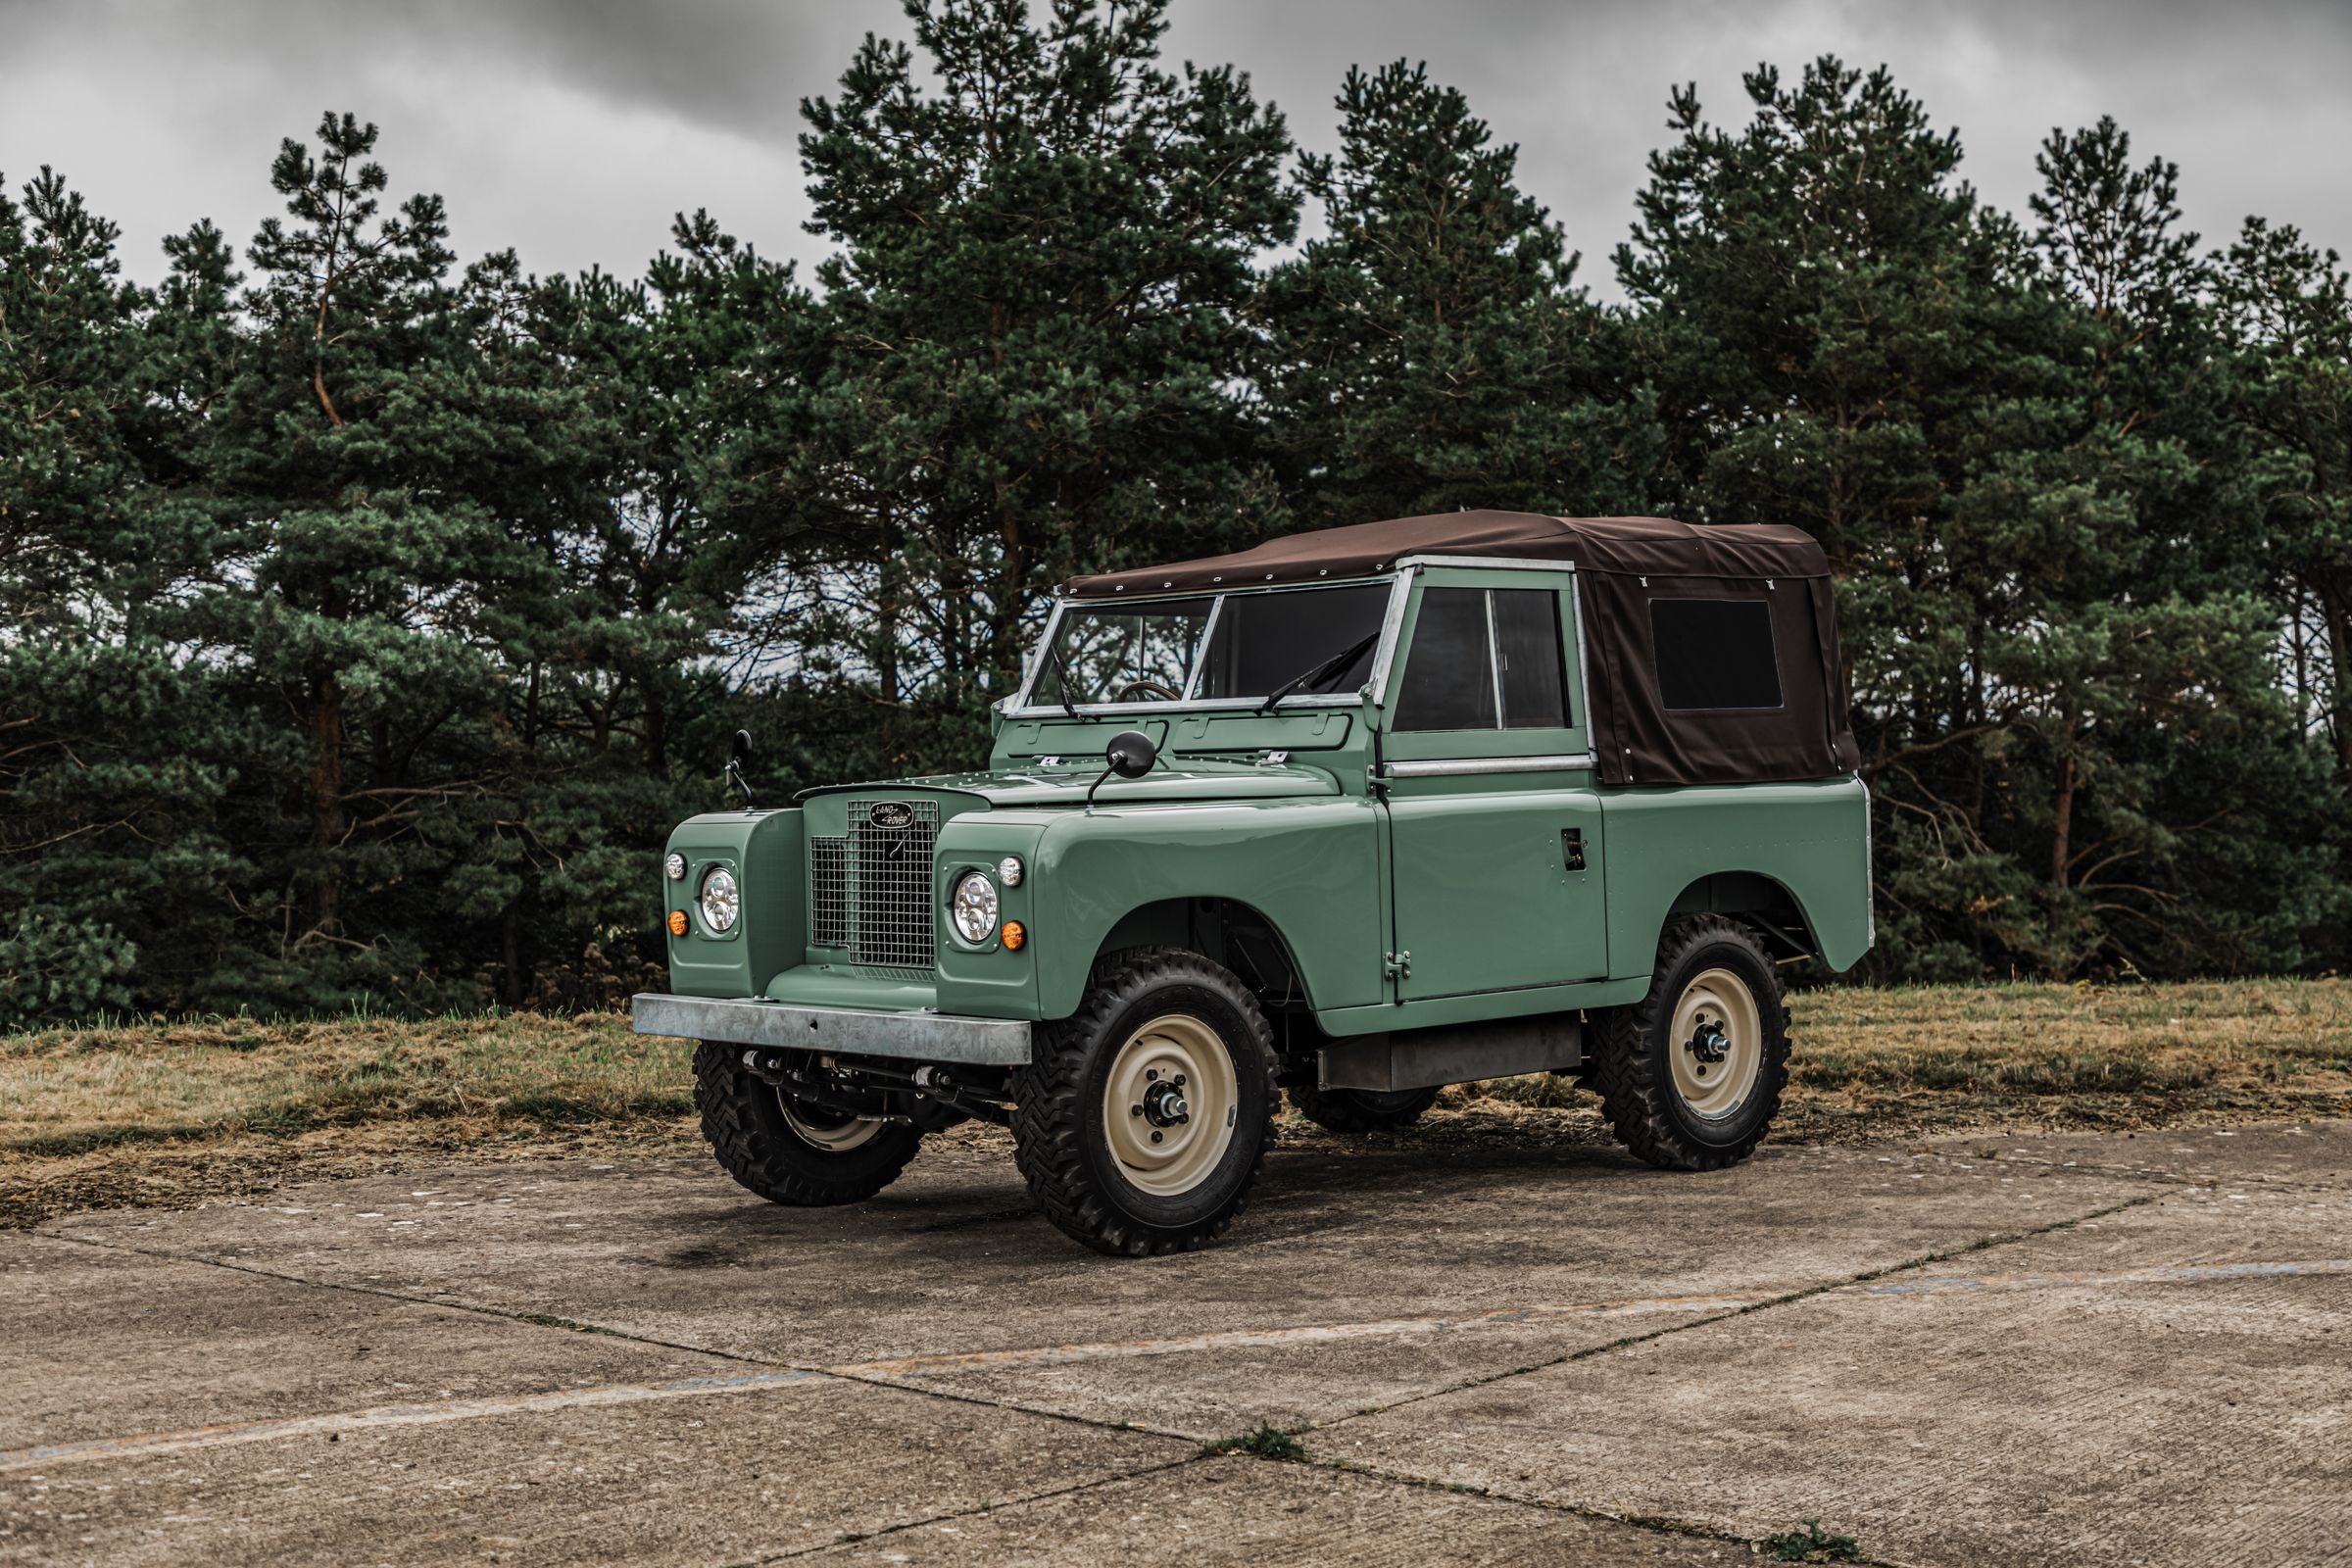 Green boxy Land Rover vehicle with a cloth top on a battered concrete slab surrounded by trees